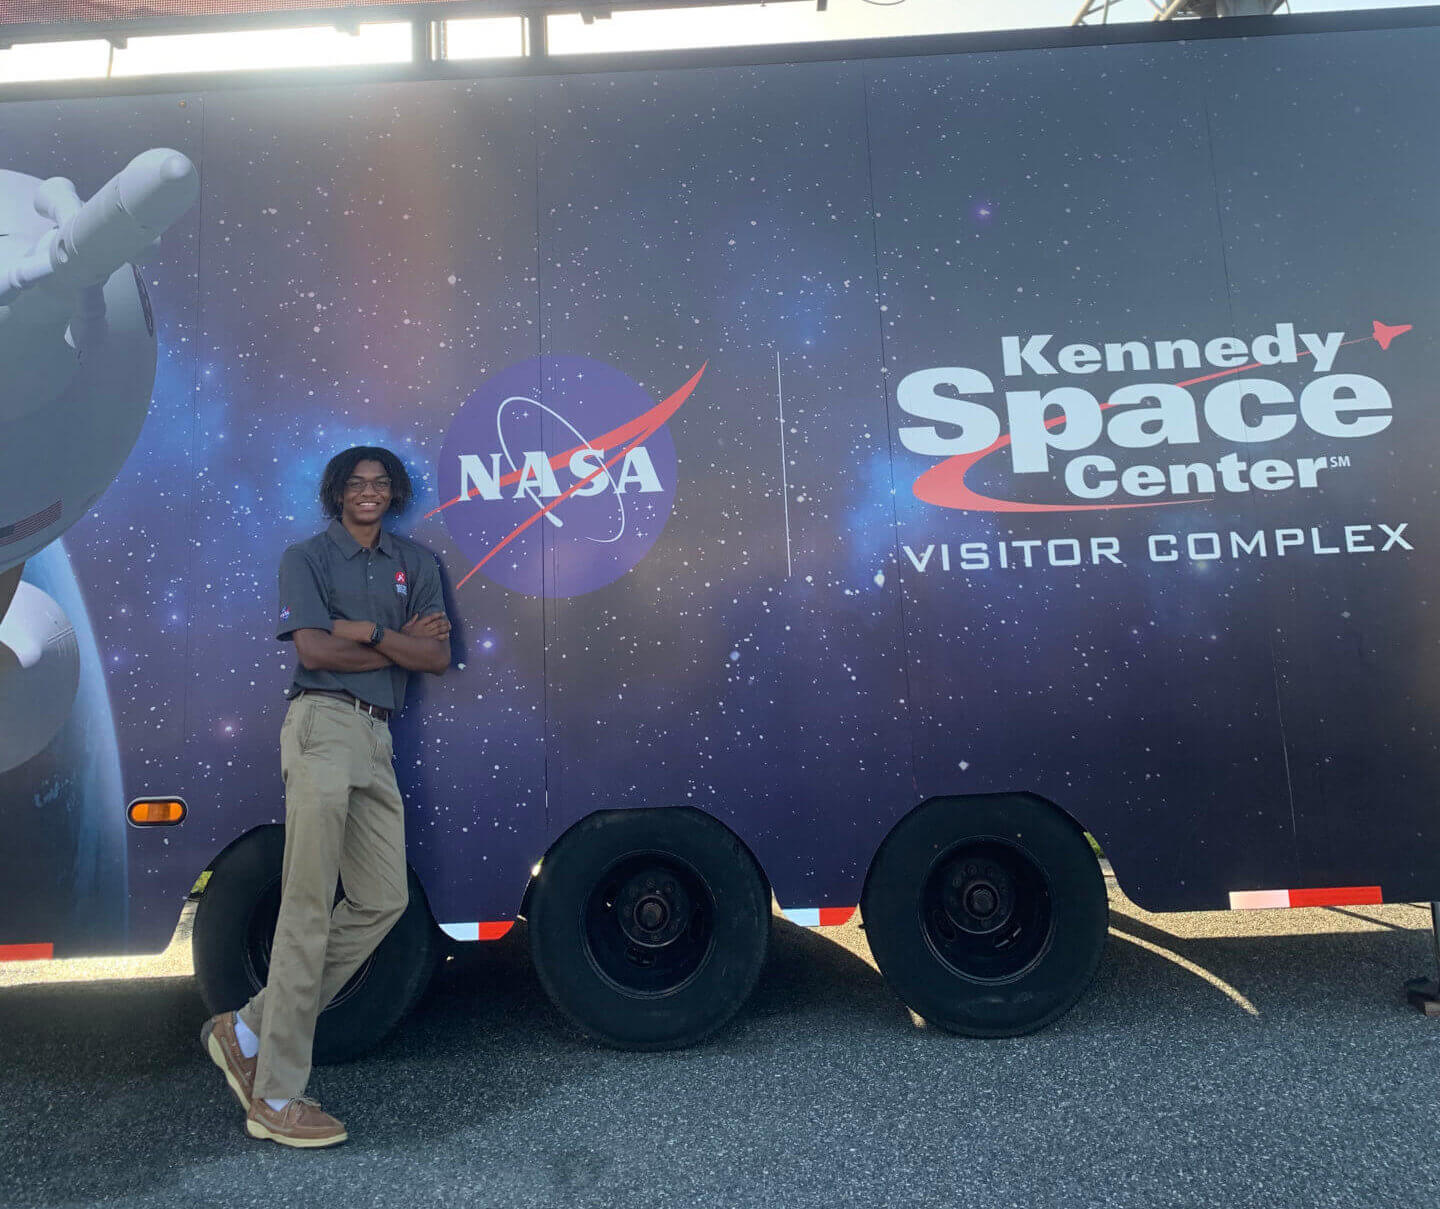 Devin Martin worked on the 2020 Mars Perseverance Rover and witnessed the launch in person from the Kennedy Space Station. Photo/Devin Martin.